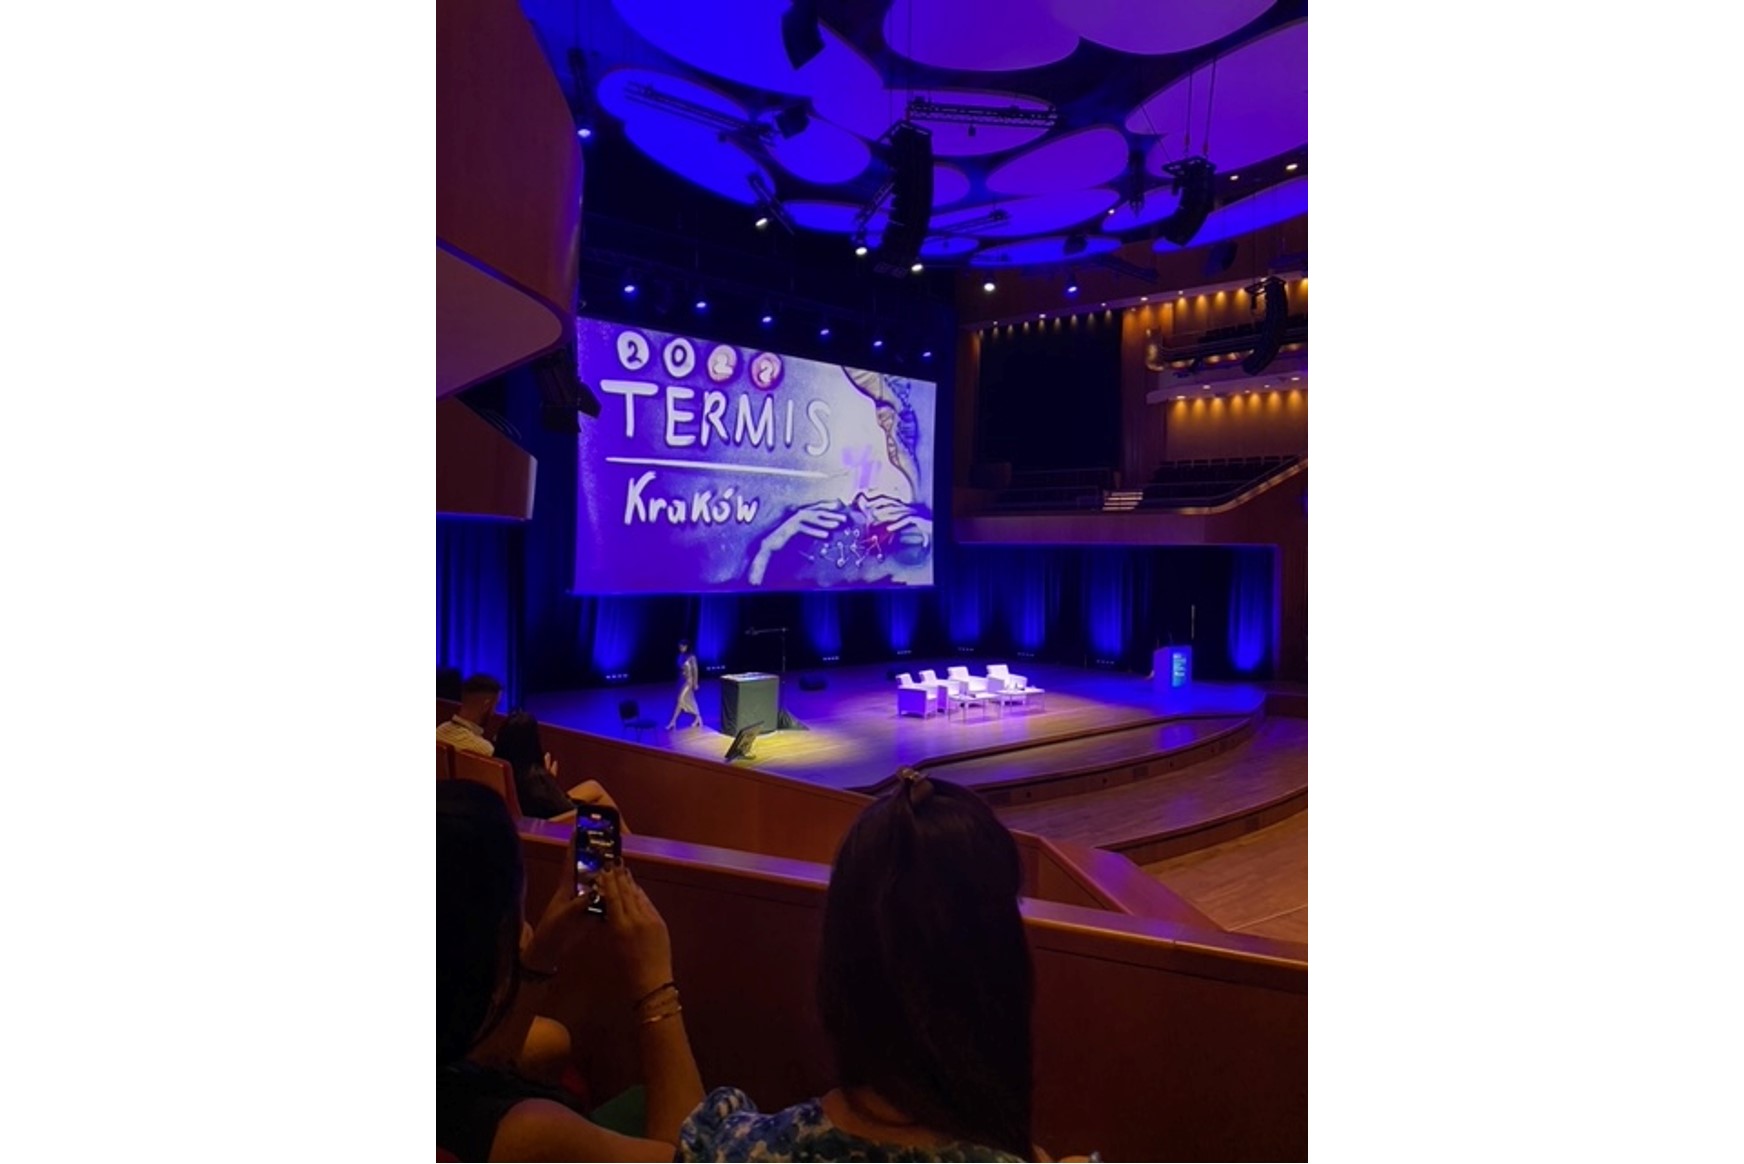 We particpated in the TERMIS 2022 conference